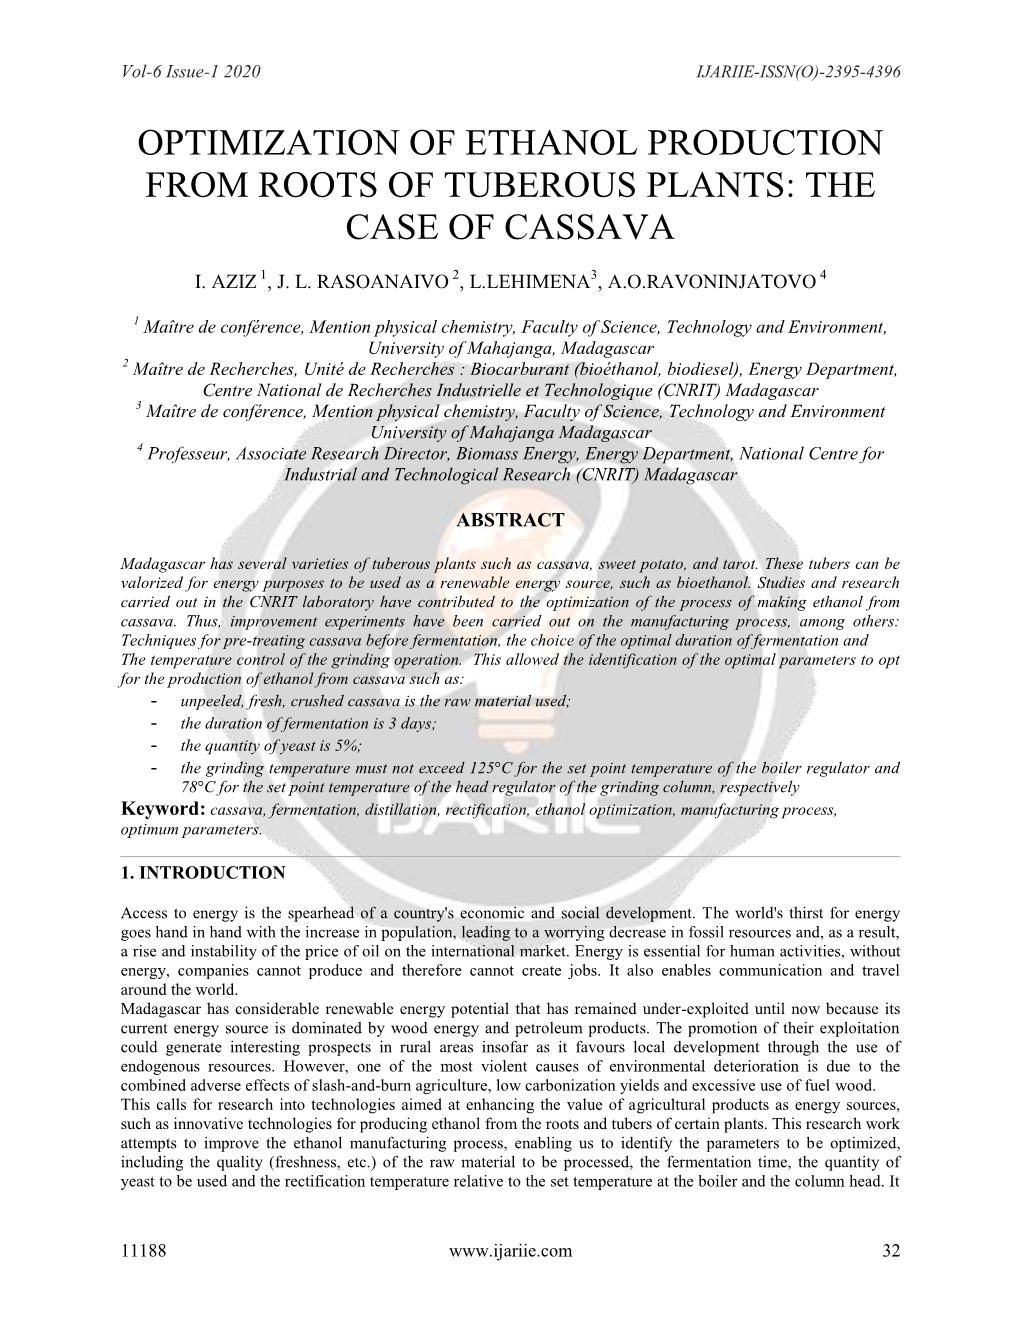 Optimization of Ethanol Production from Roots of Tuberous Plants: the Case of Cassava